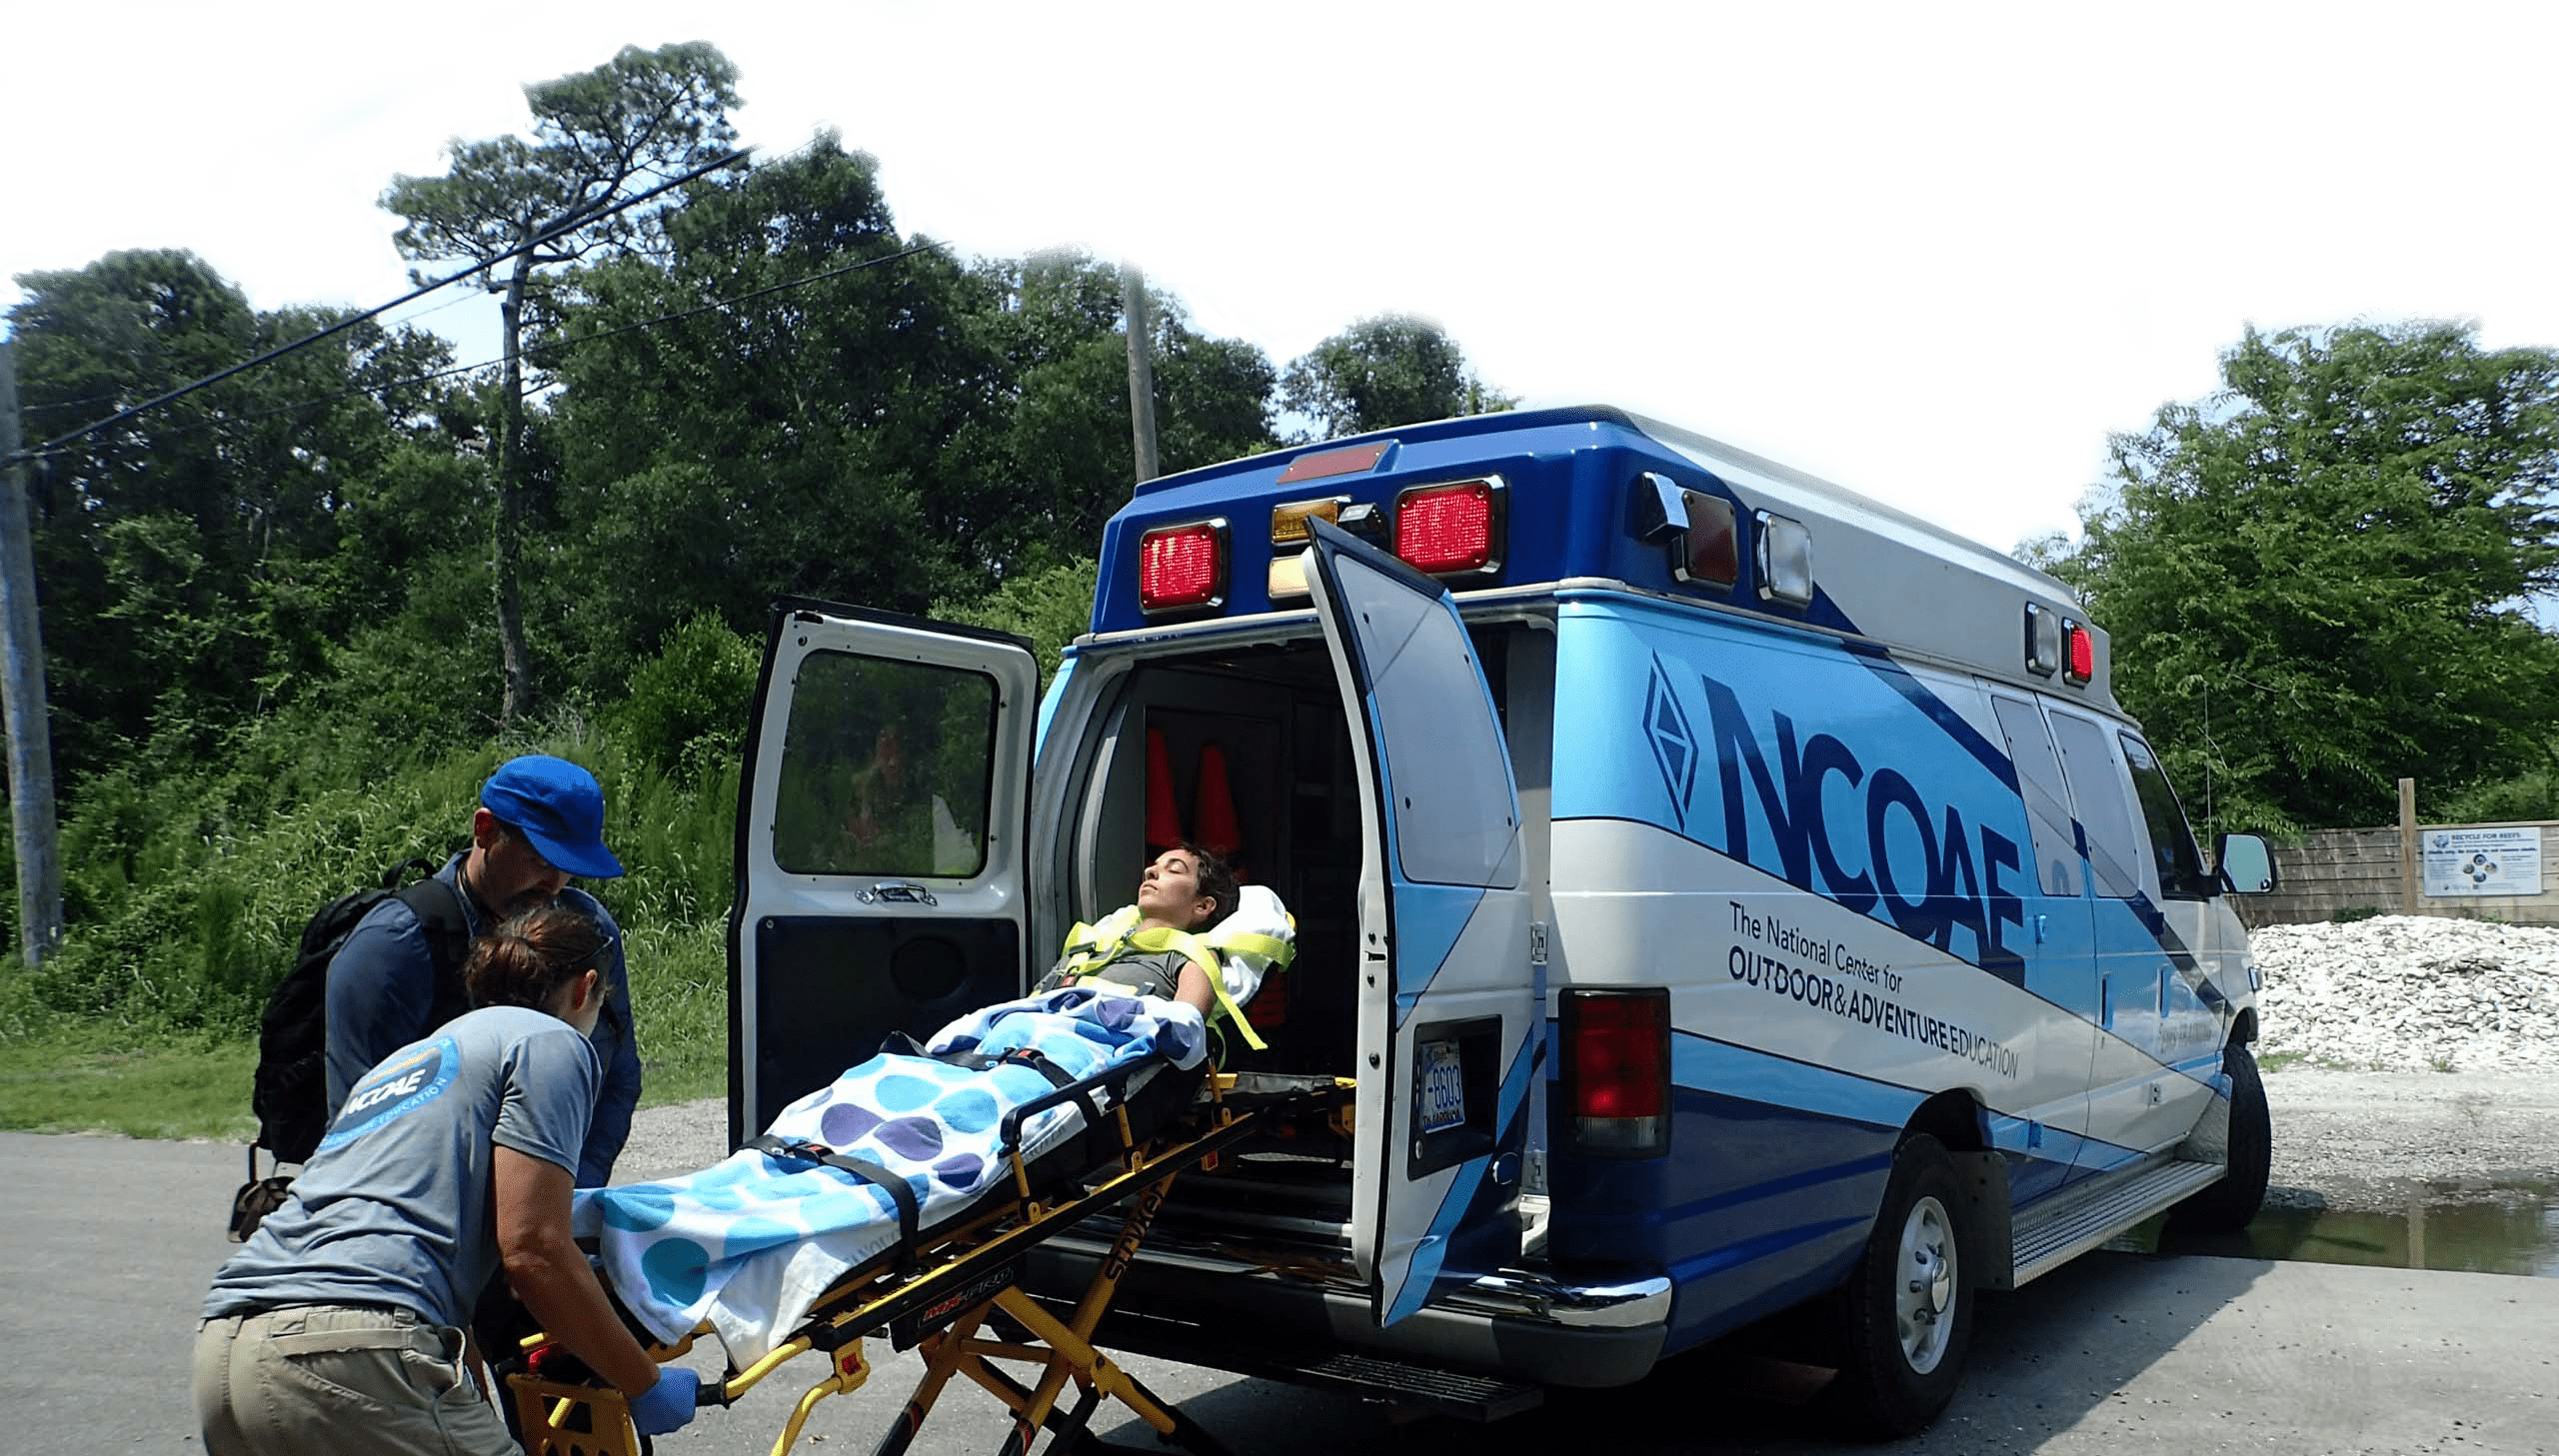 NCOAE EMT personnel pushing a patient on a stretcher into an NCOAE vehicle.